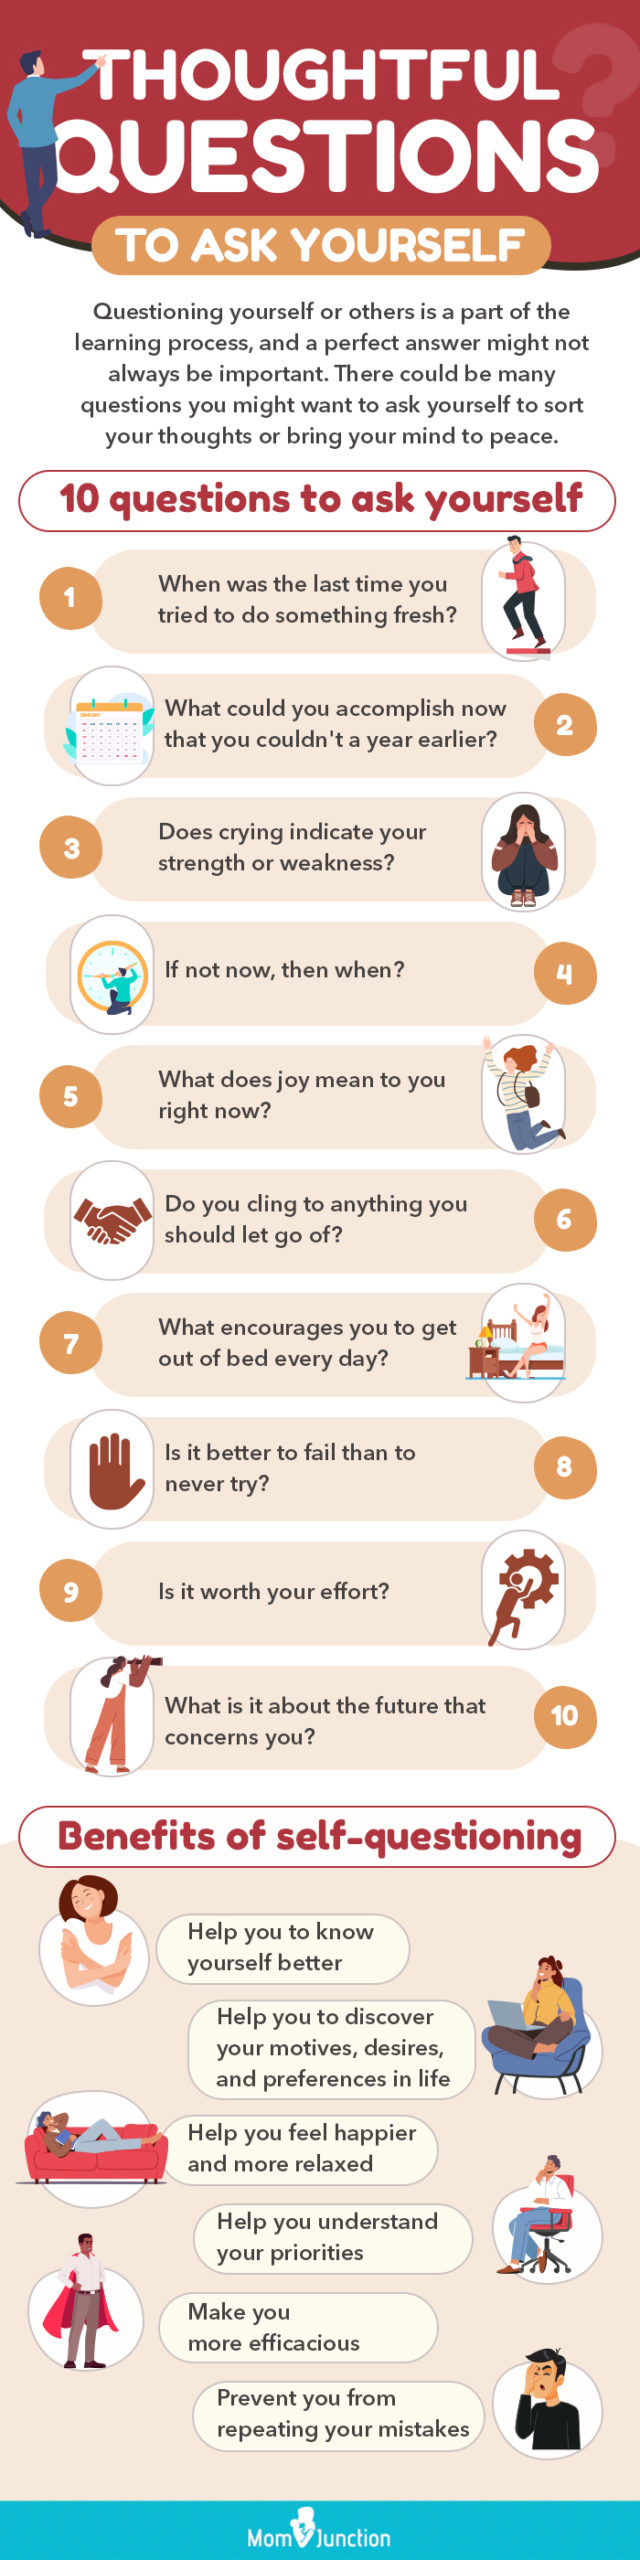 thoughtful questions to ask yourself (infographic)